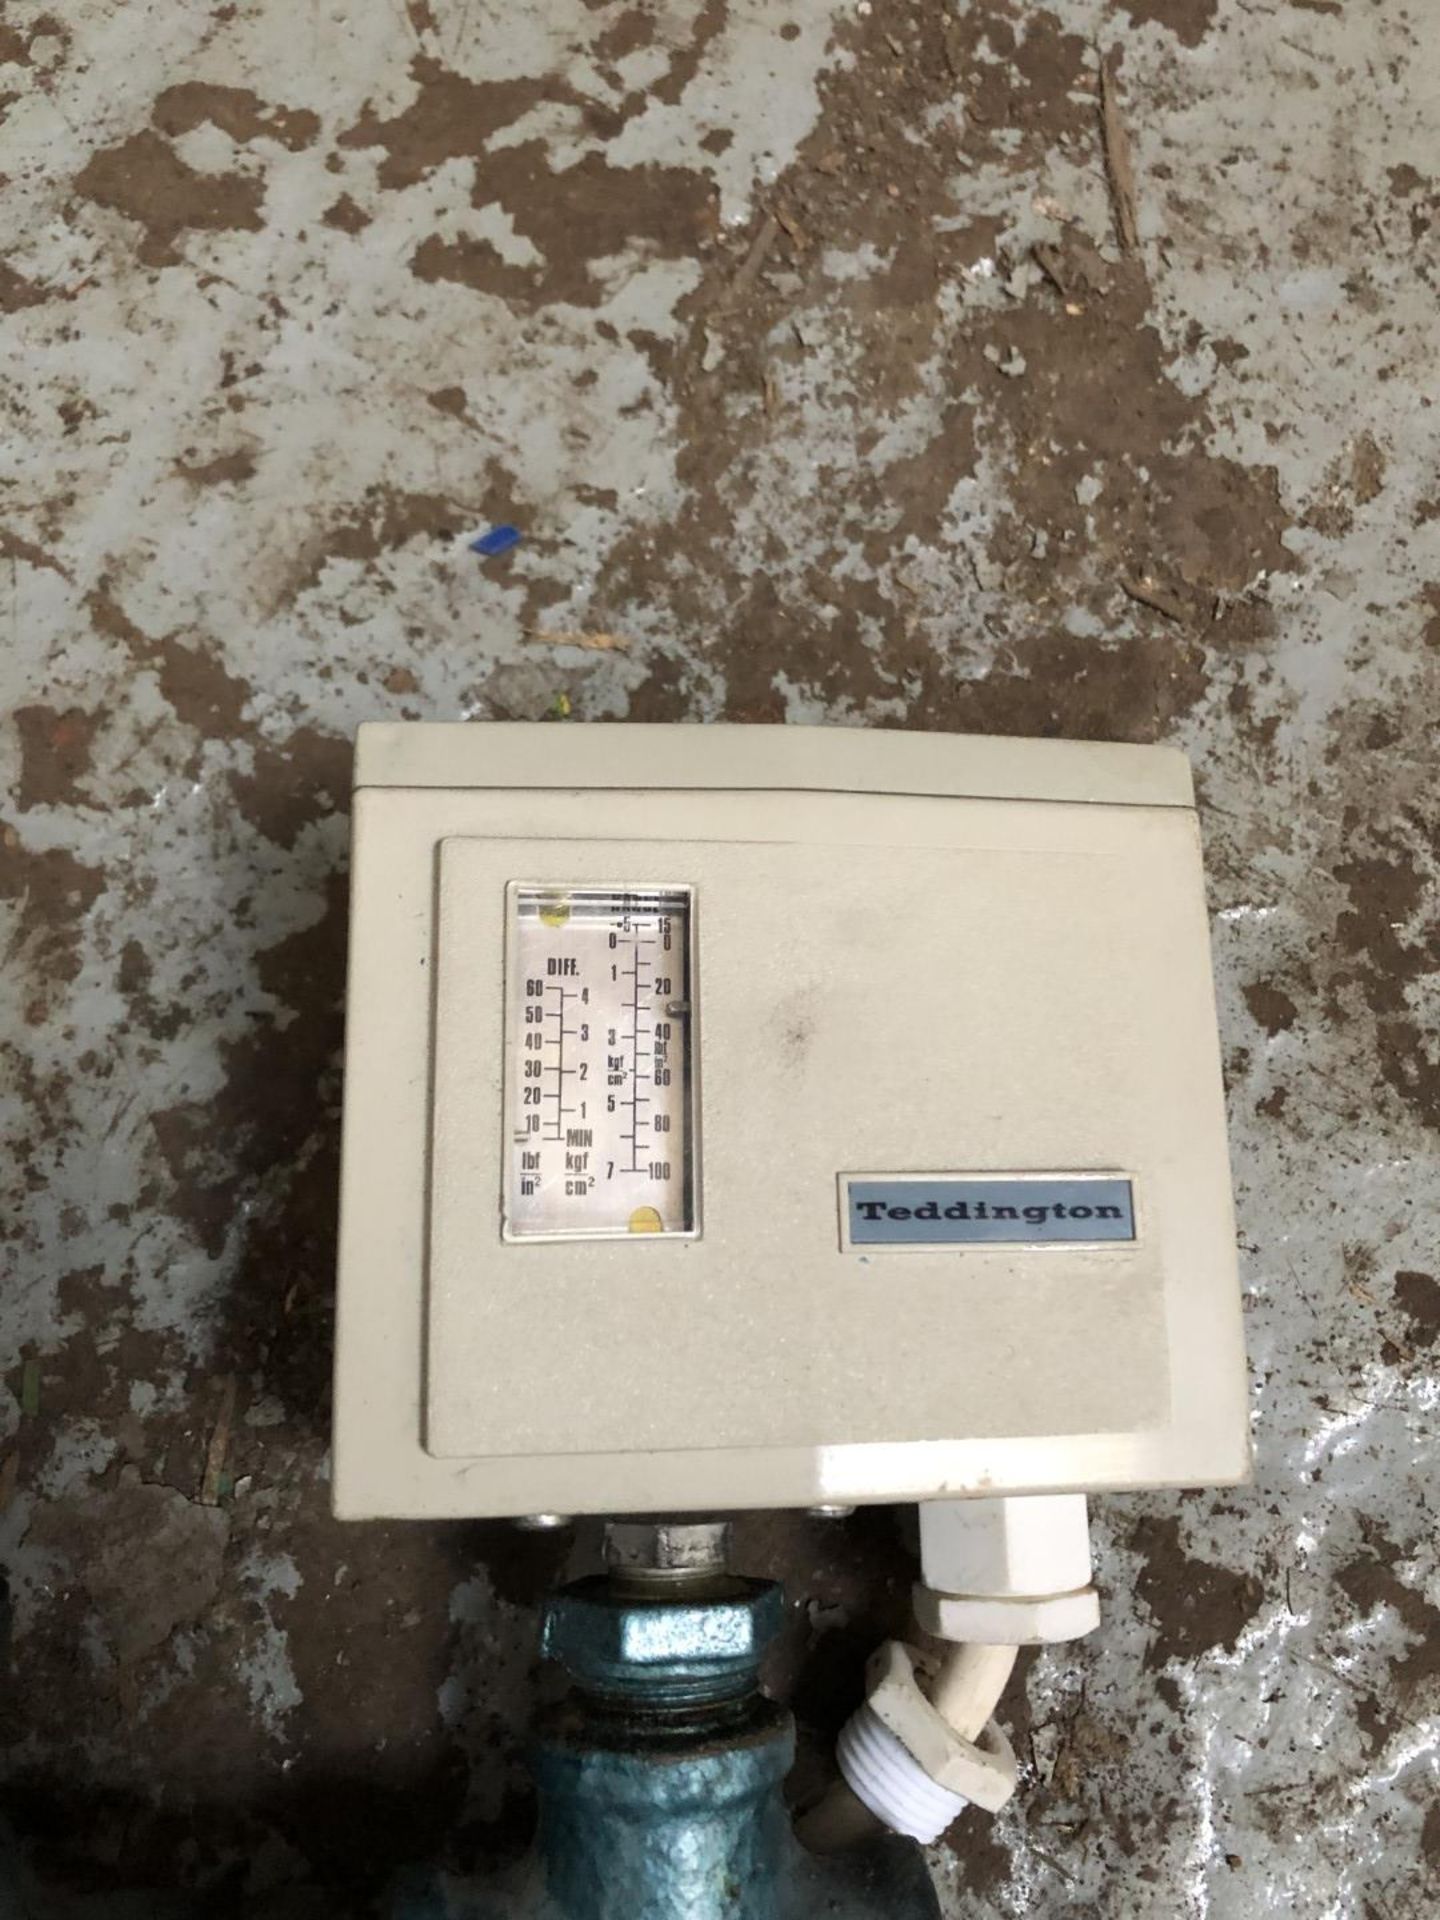 Lot Of Water Pressure Appliances - NP003 - CL344 - Location: Altrincham WA14 - Image 2 of 7